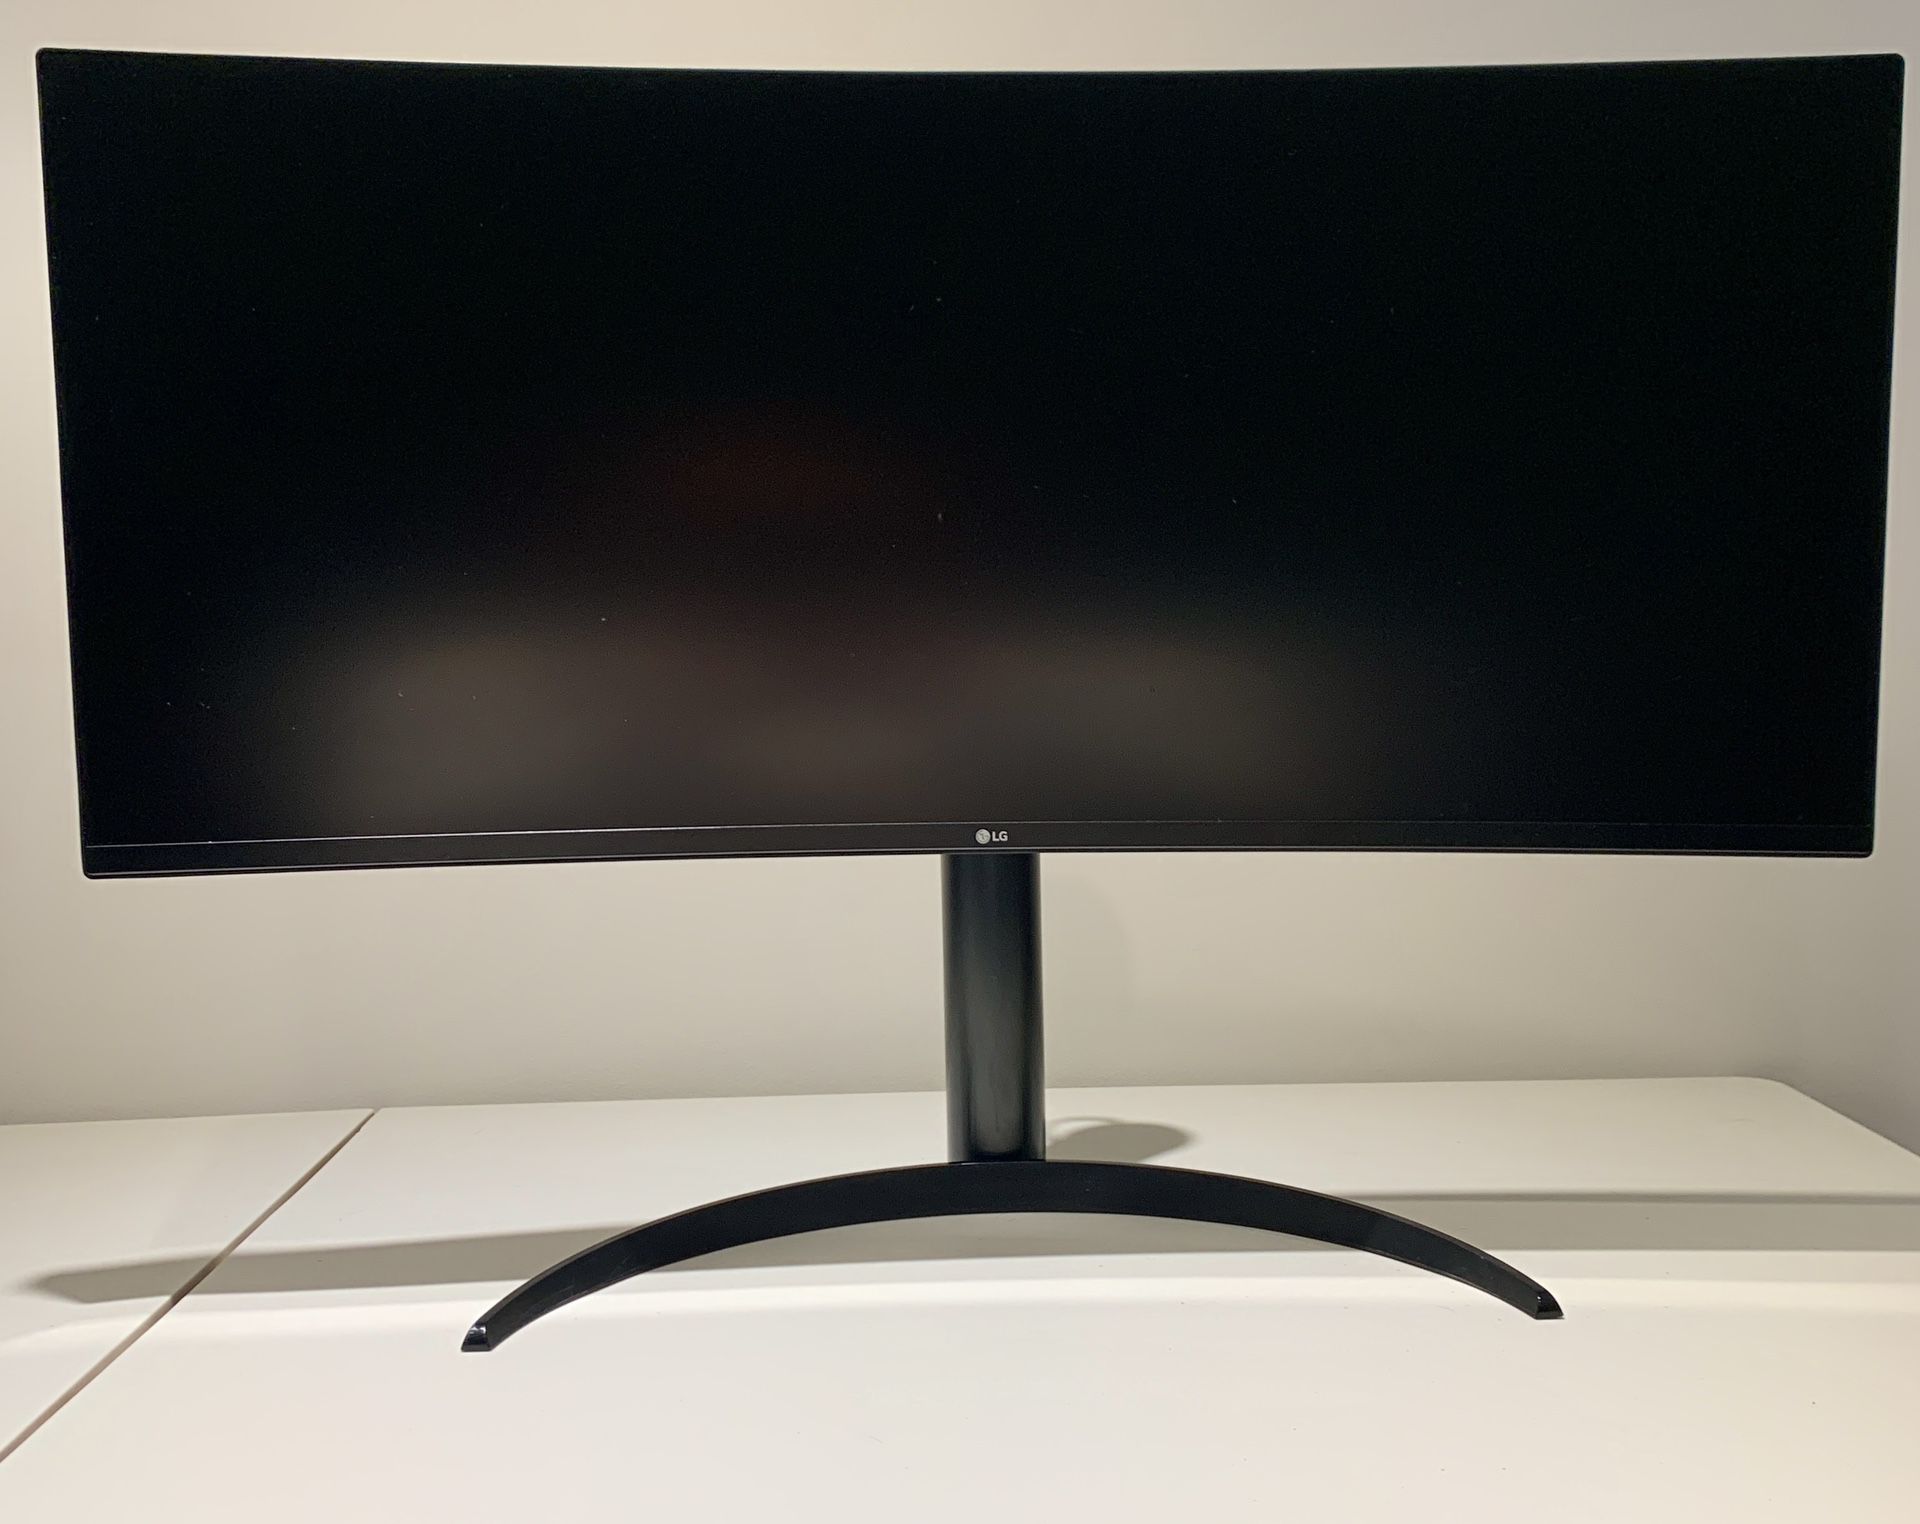 34” LG Curved Ultrawide QHD HDR FreeSync Premium Monitor with 160Hz Refresh Rate